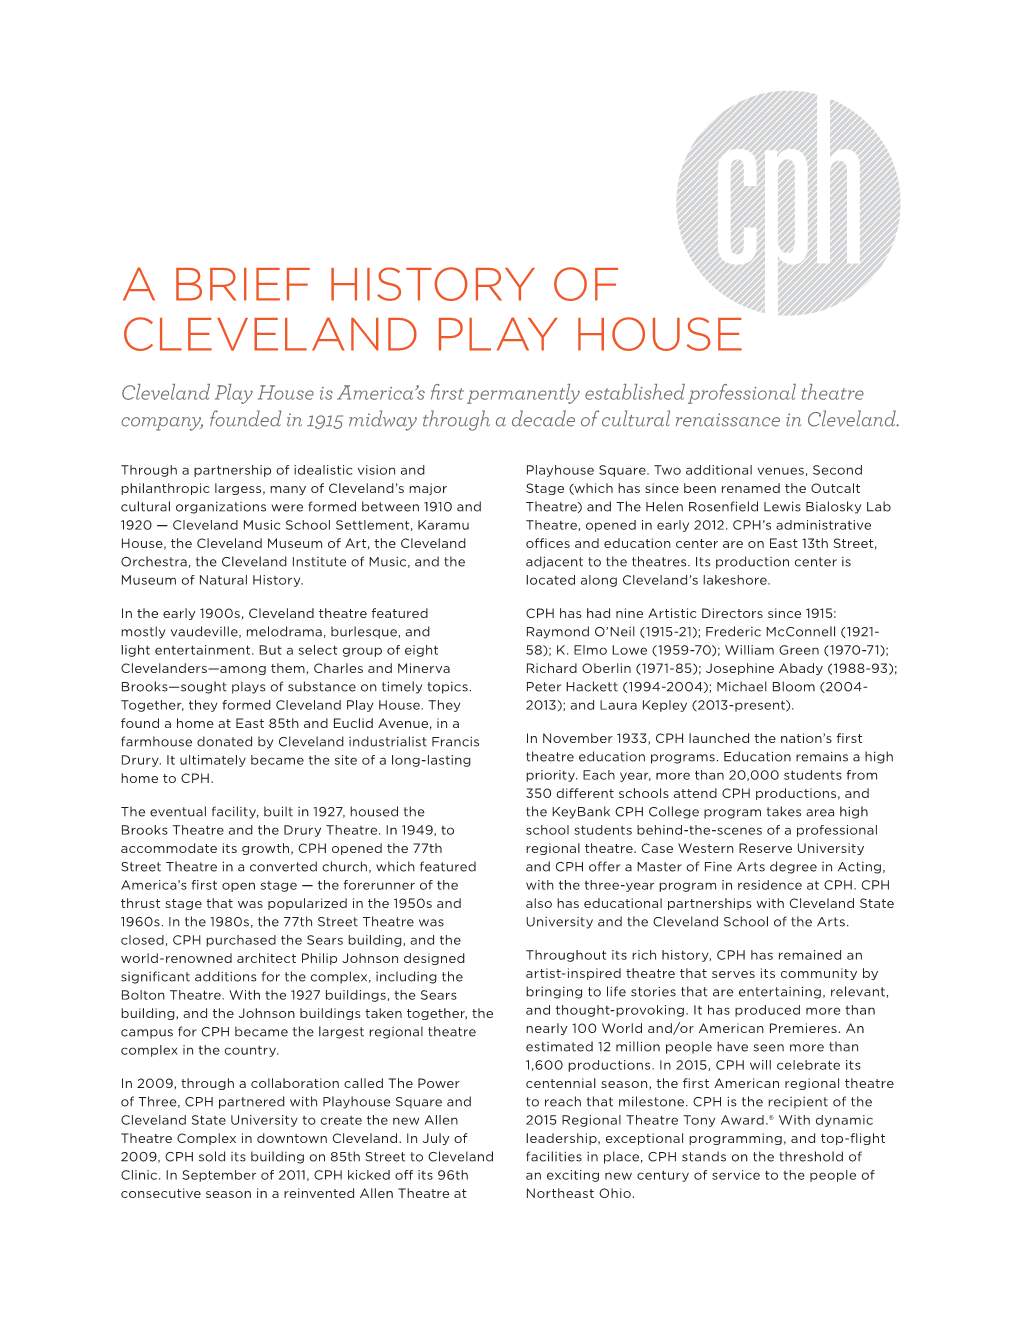 A Brief History of Cleveland Play House